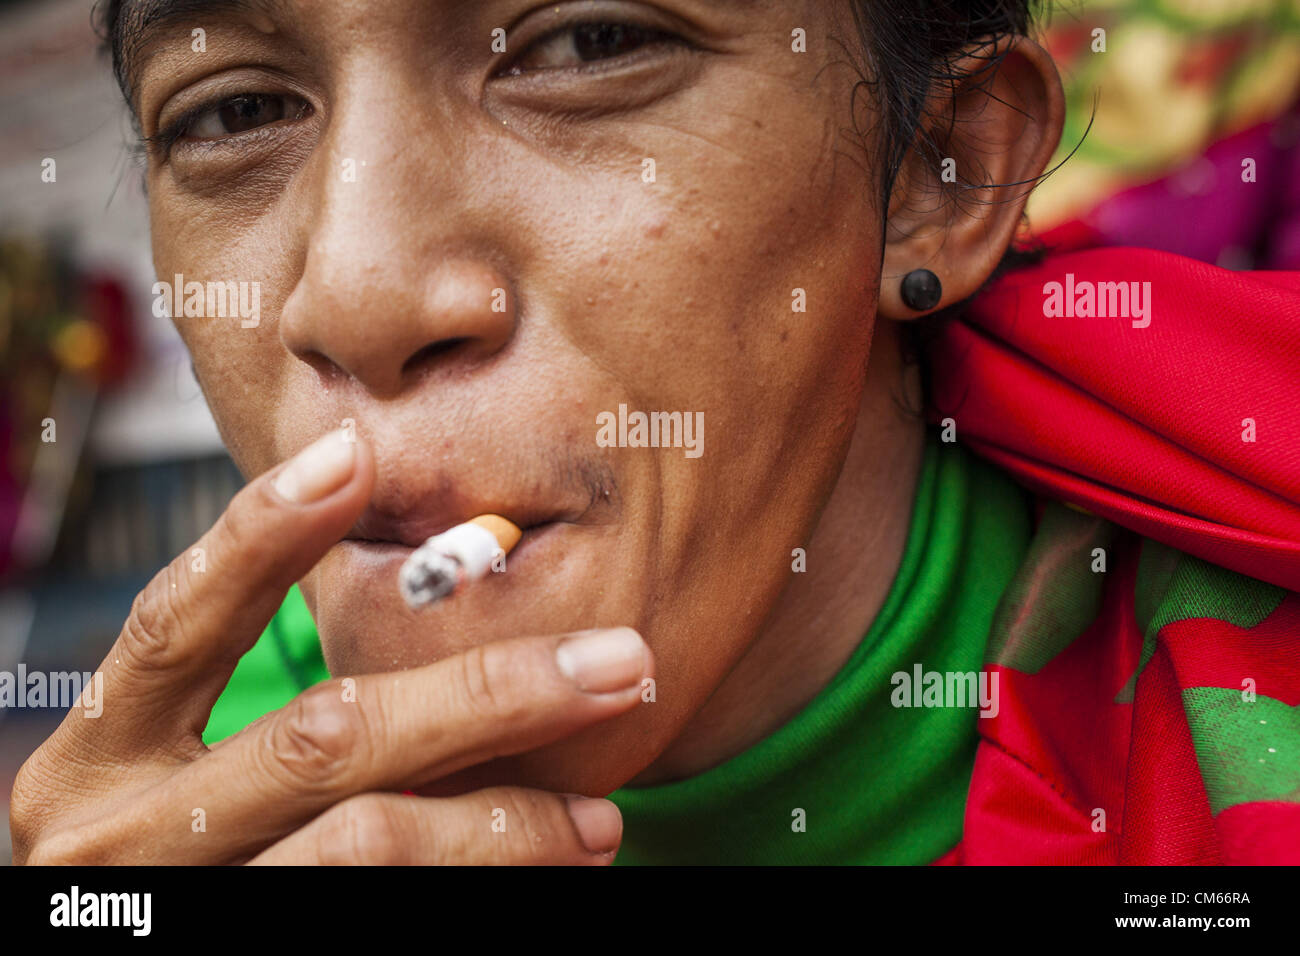 Oct. 14, 2012 - Bangkok, Thailand - A man smokes a cigarette on a street in Bangkok, Thailand. Thailand and the Philippines are involved in a dispute over cigarette taxes. Philippine trade officials allege that Thailand charges an unfair import tax on Philippine cigarettes. Thai officials have responded that they have taken the matter under advisement. Philippine officials said they may take the issue to the World Trade Organization if Thailand doesn't respond by Oct. 15. (Credit Image: © Jack Kurtz/ZUMAPRESS.com) Stock Photo